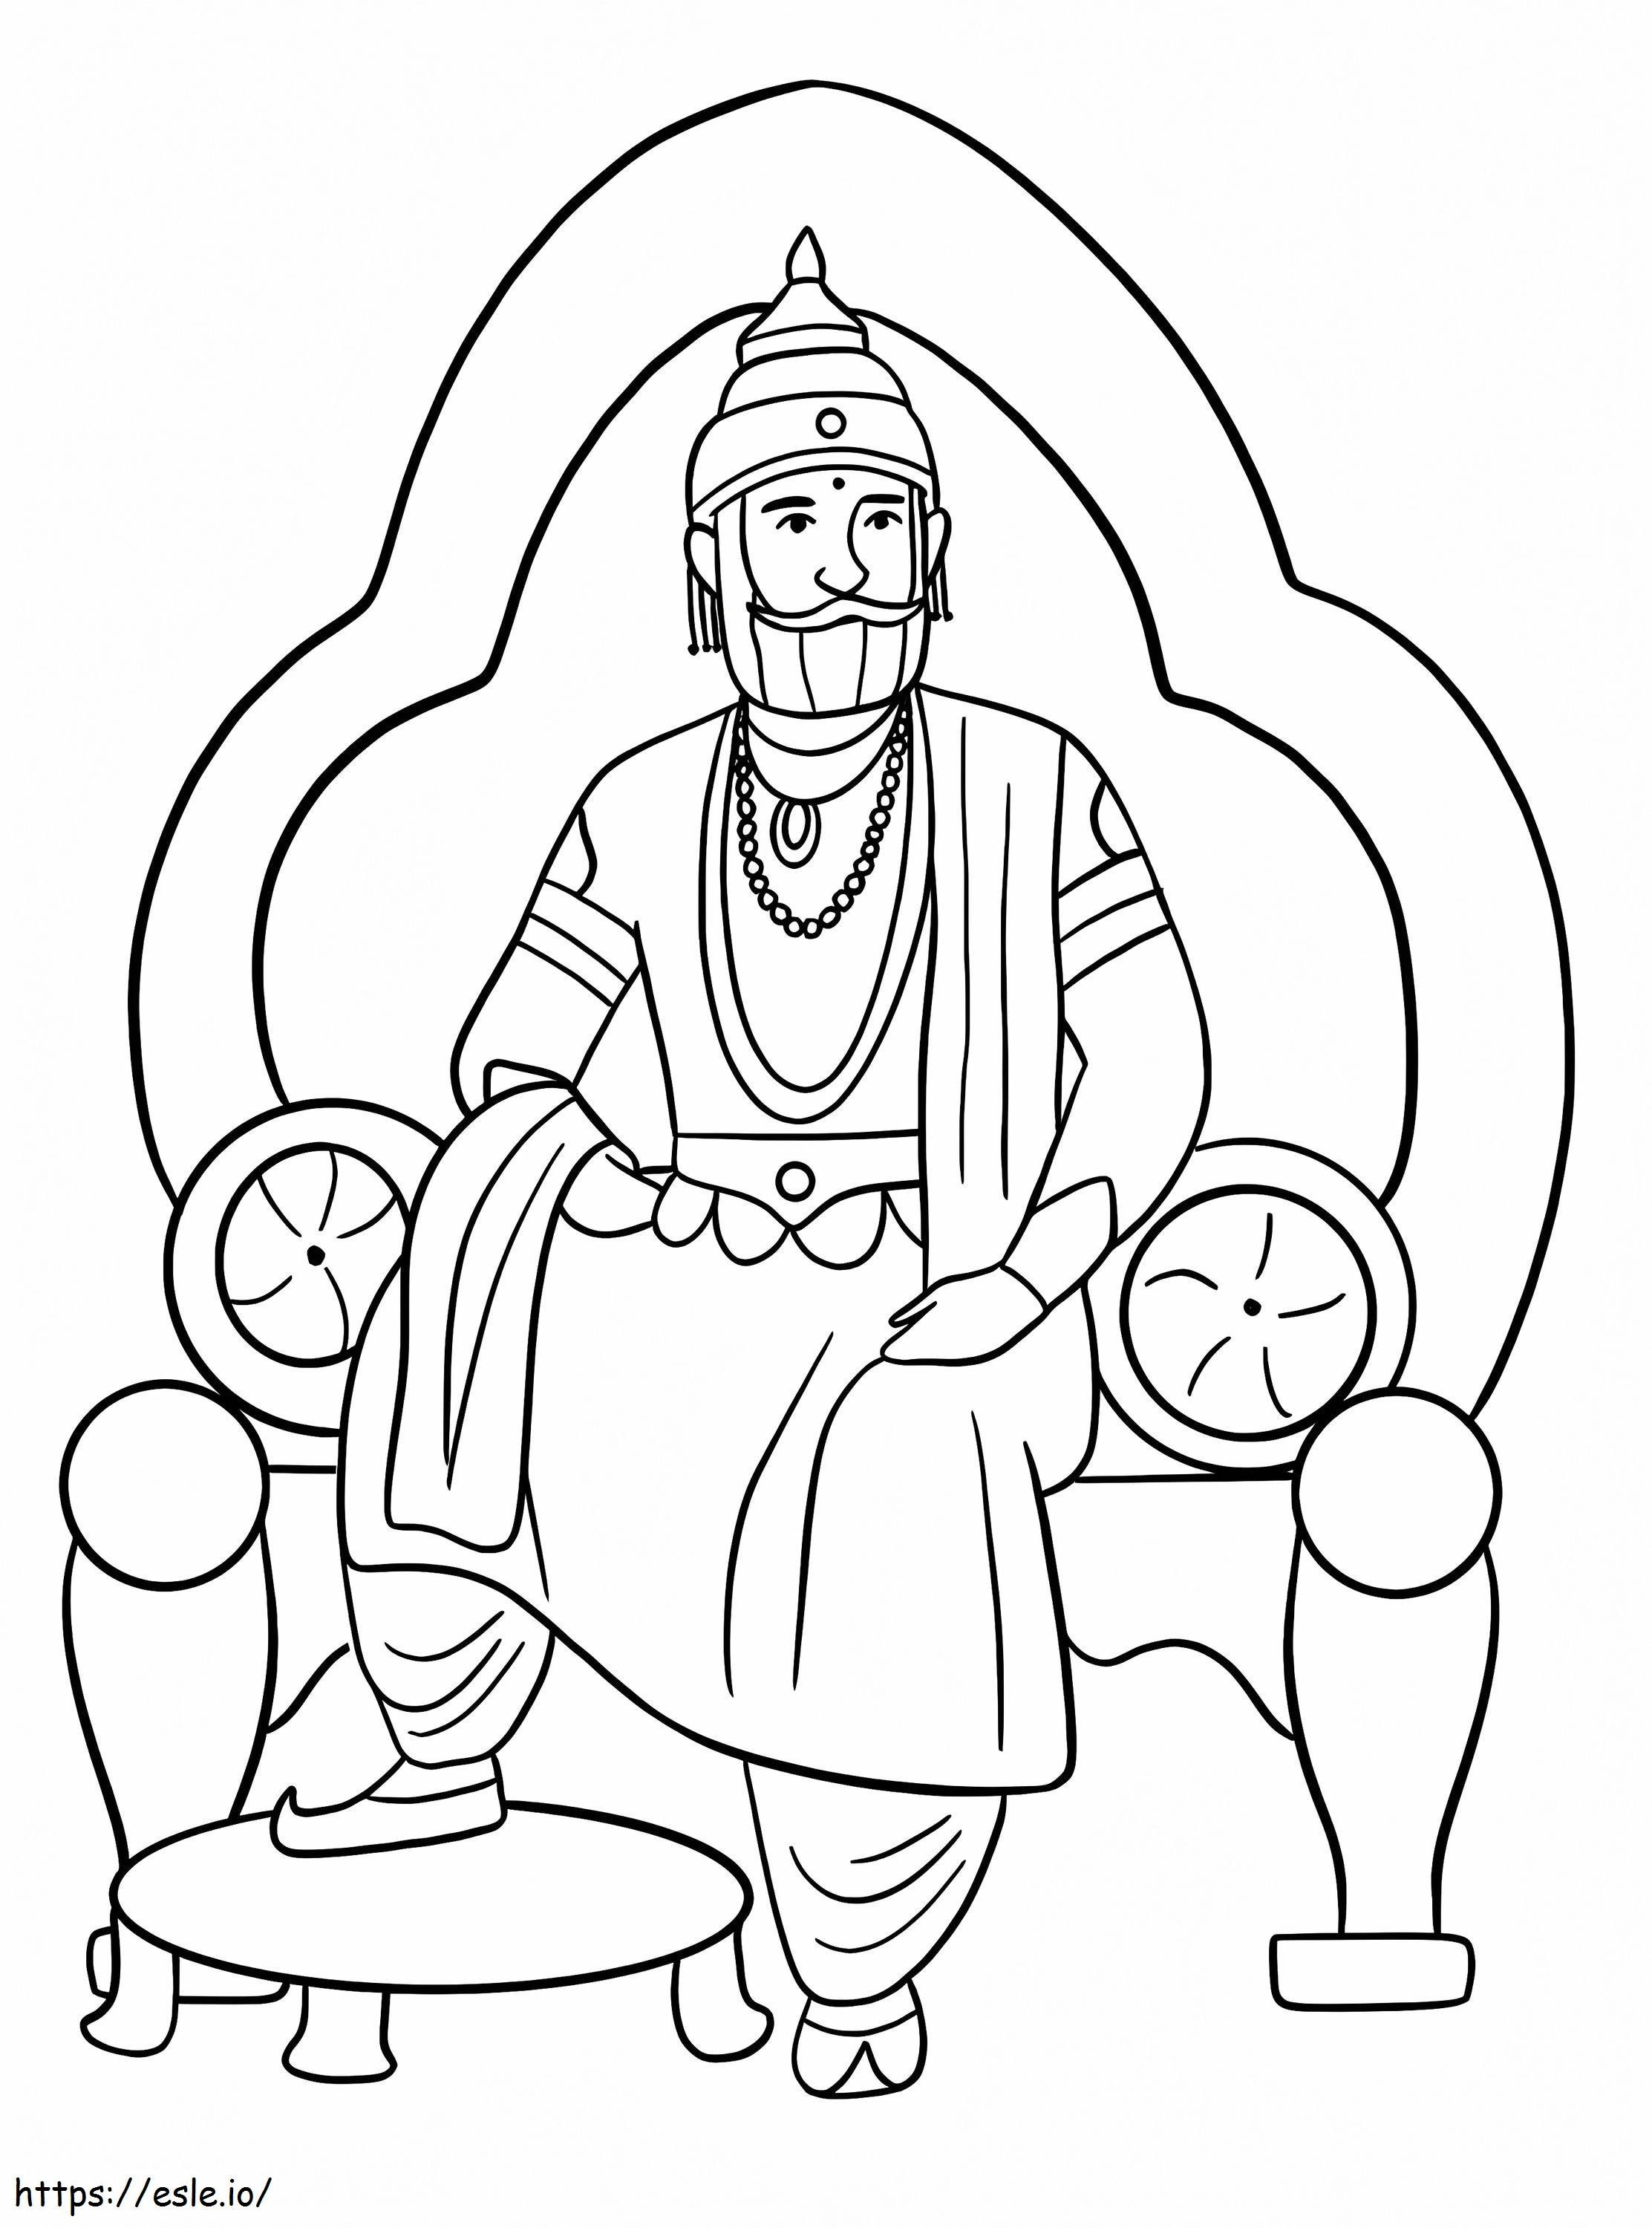 Indian King coloring page